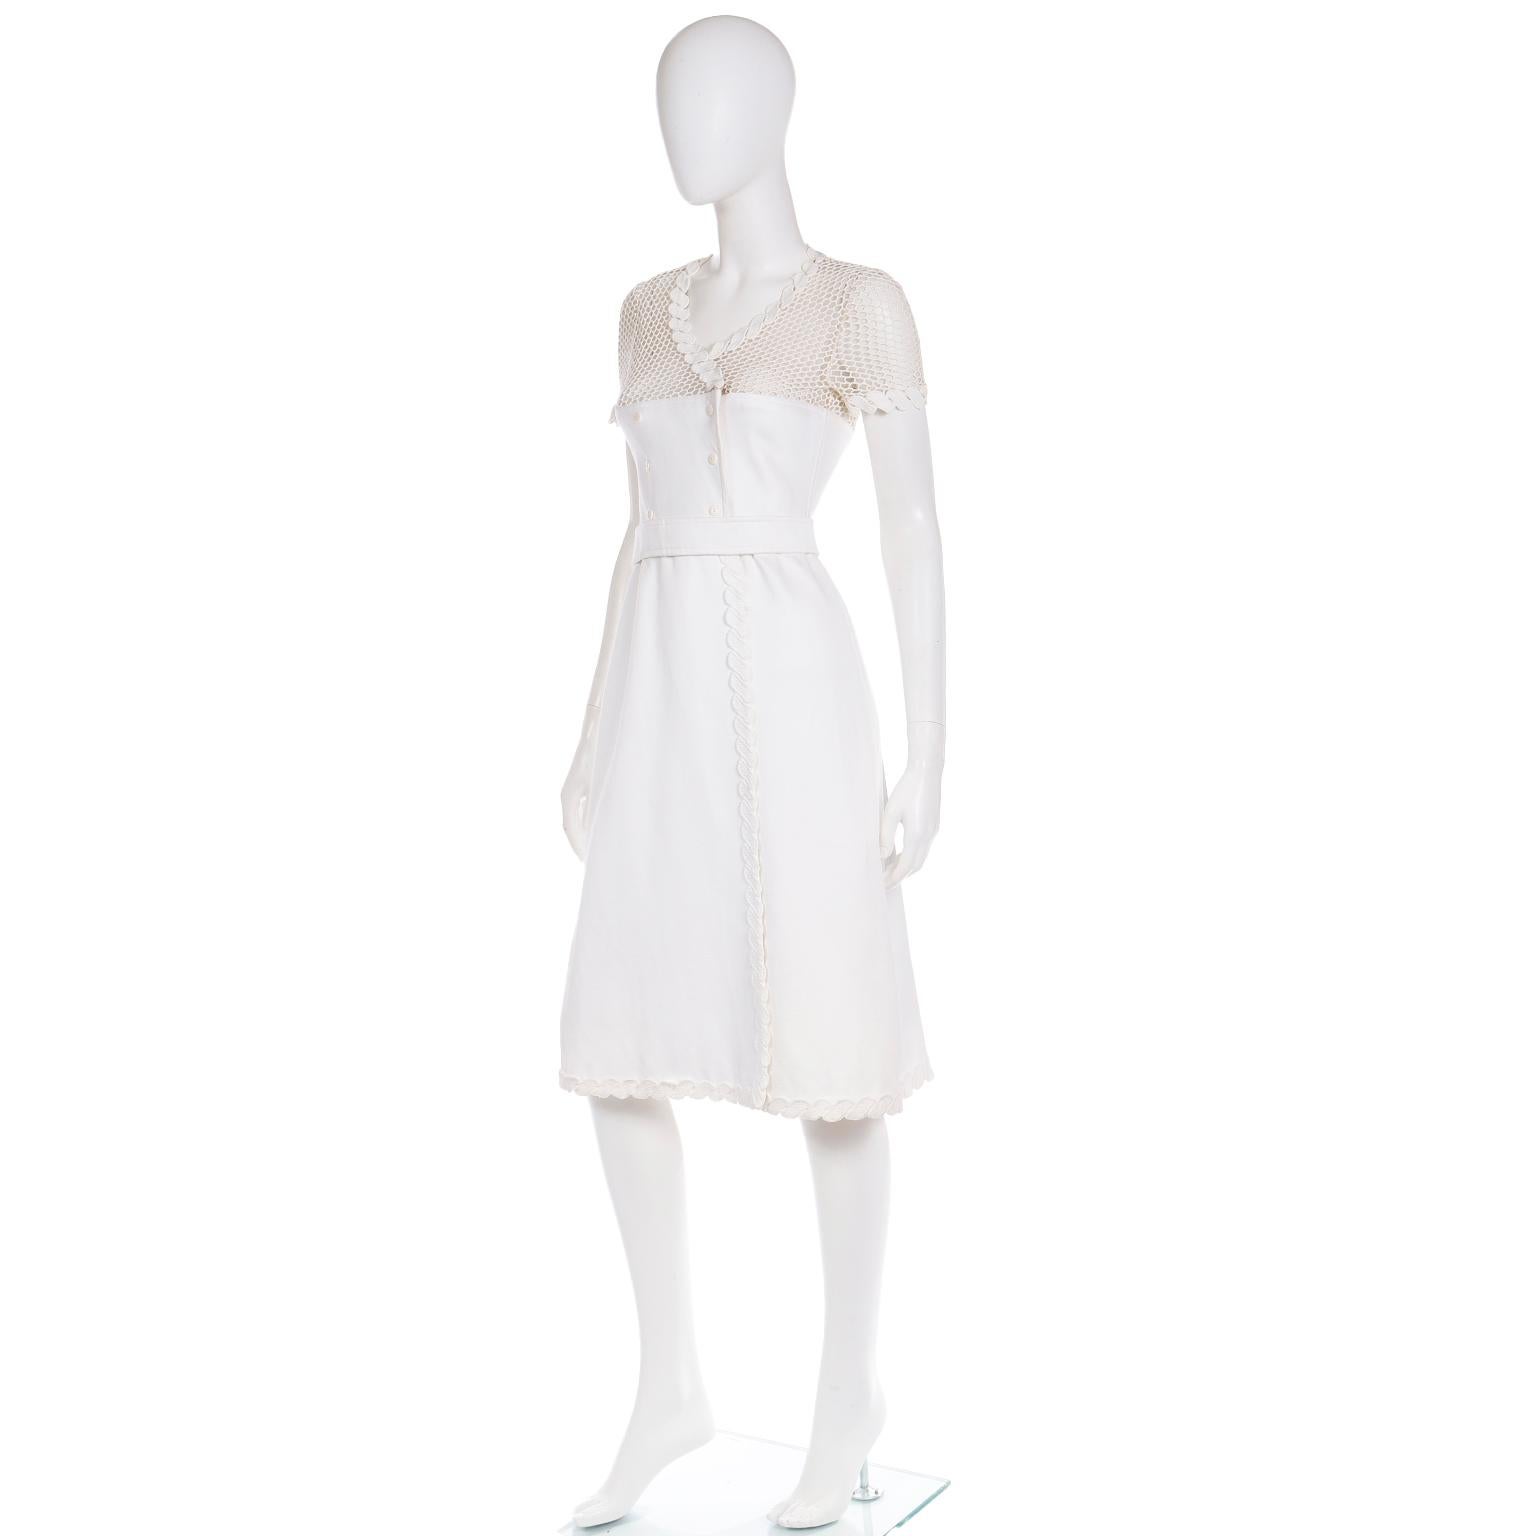 Vintage 1960s Andre Courreges White Dress With Crochet Mesh & Belt In Excellent Condition For Sale In Portland, OR